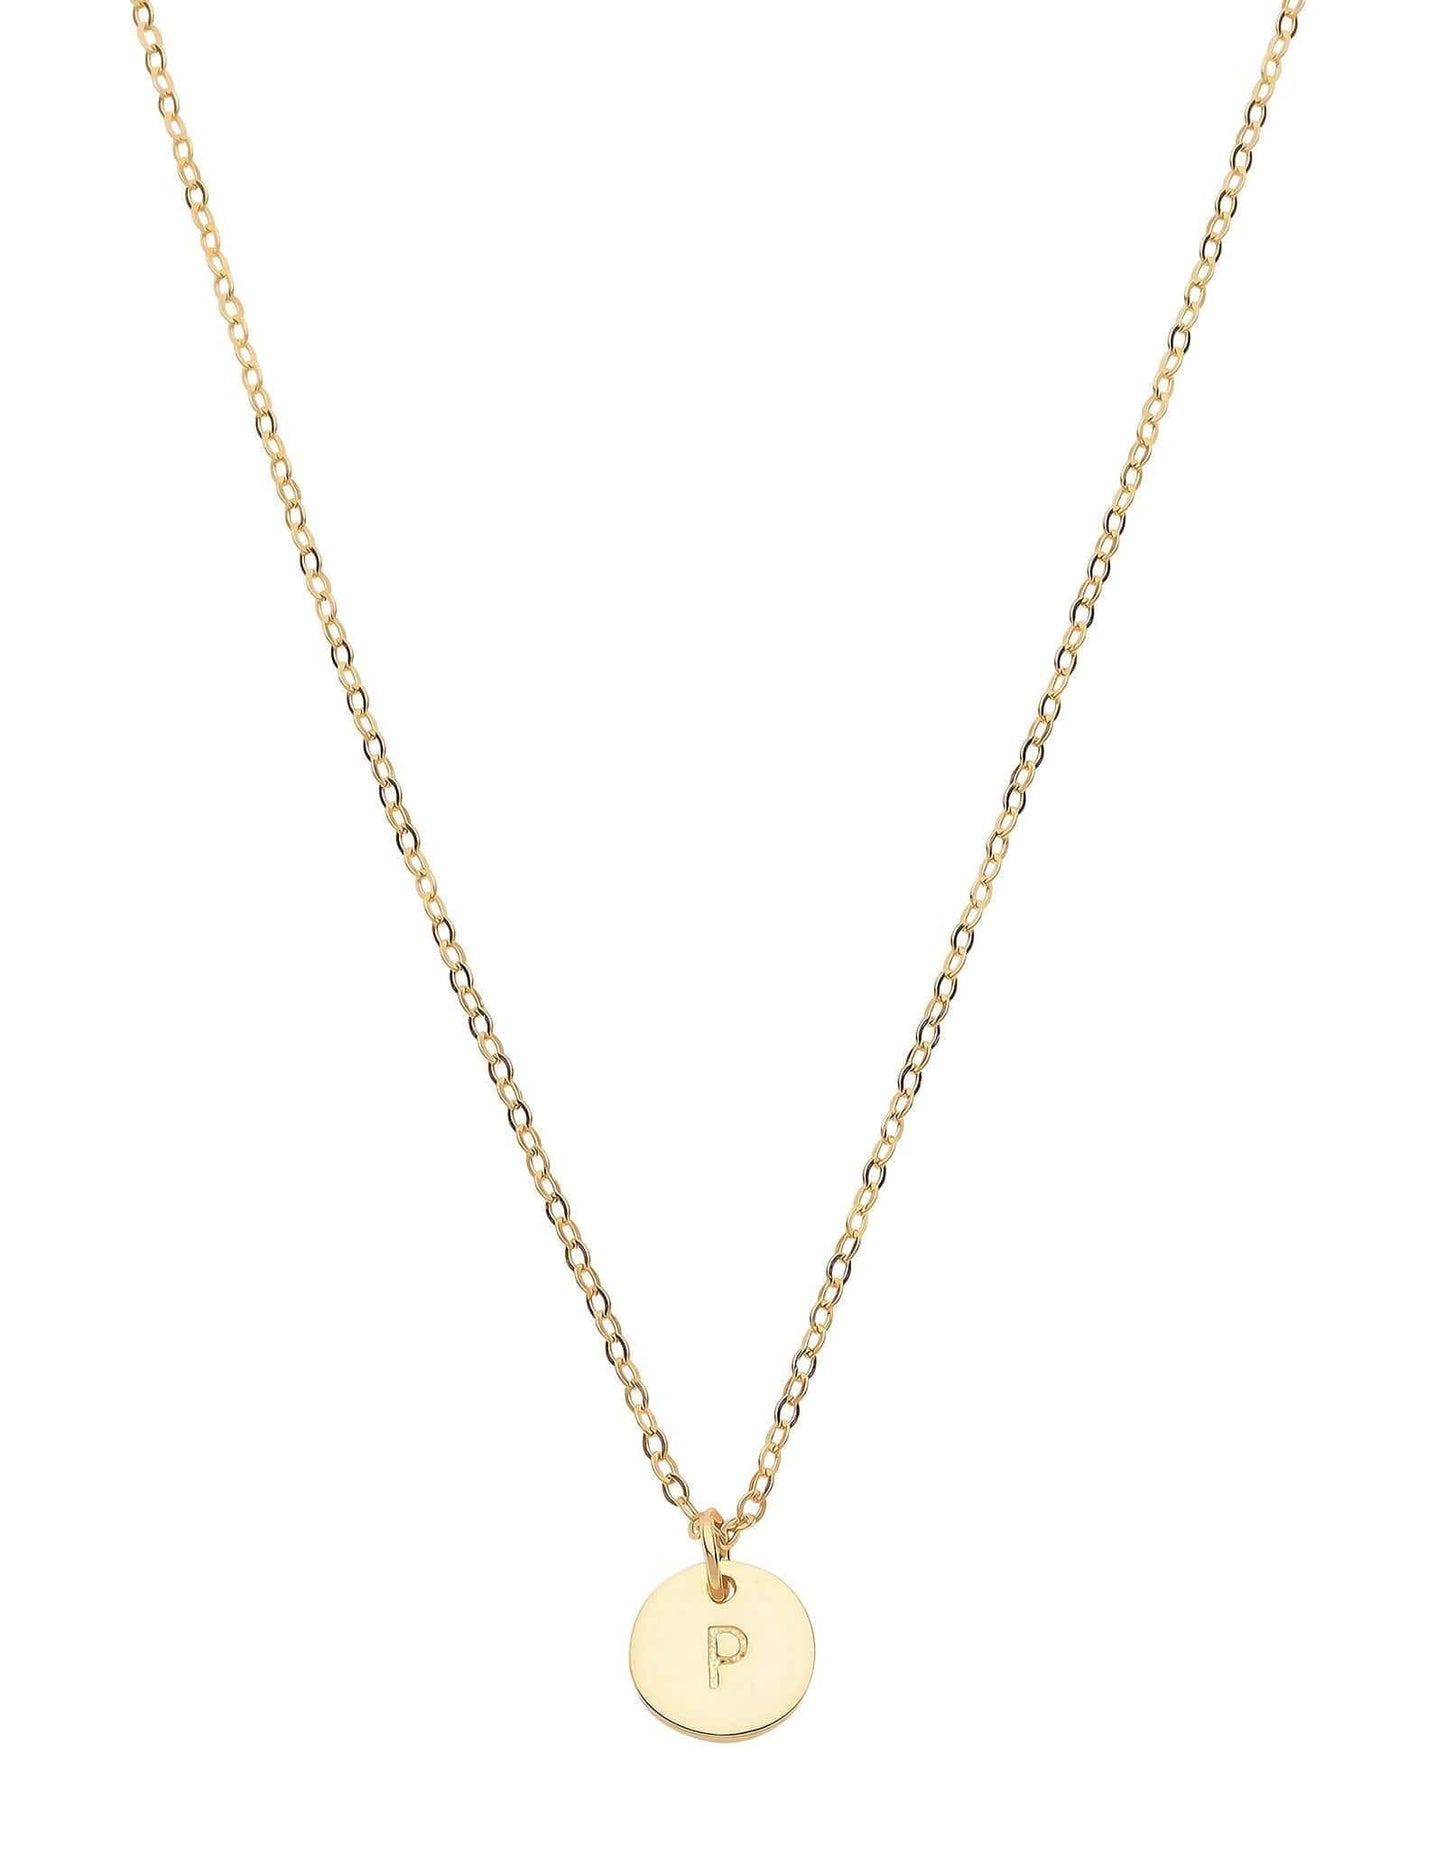 Dear Addison Yellow Gold Letter P Necklace